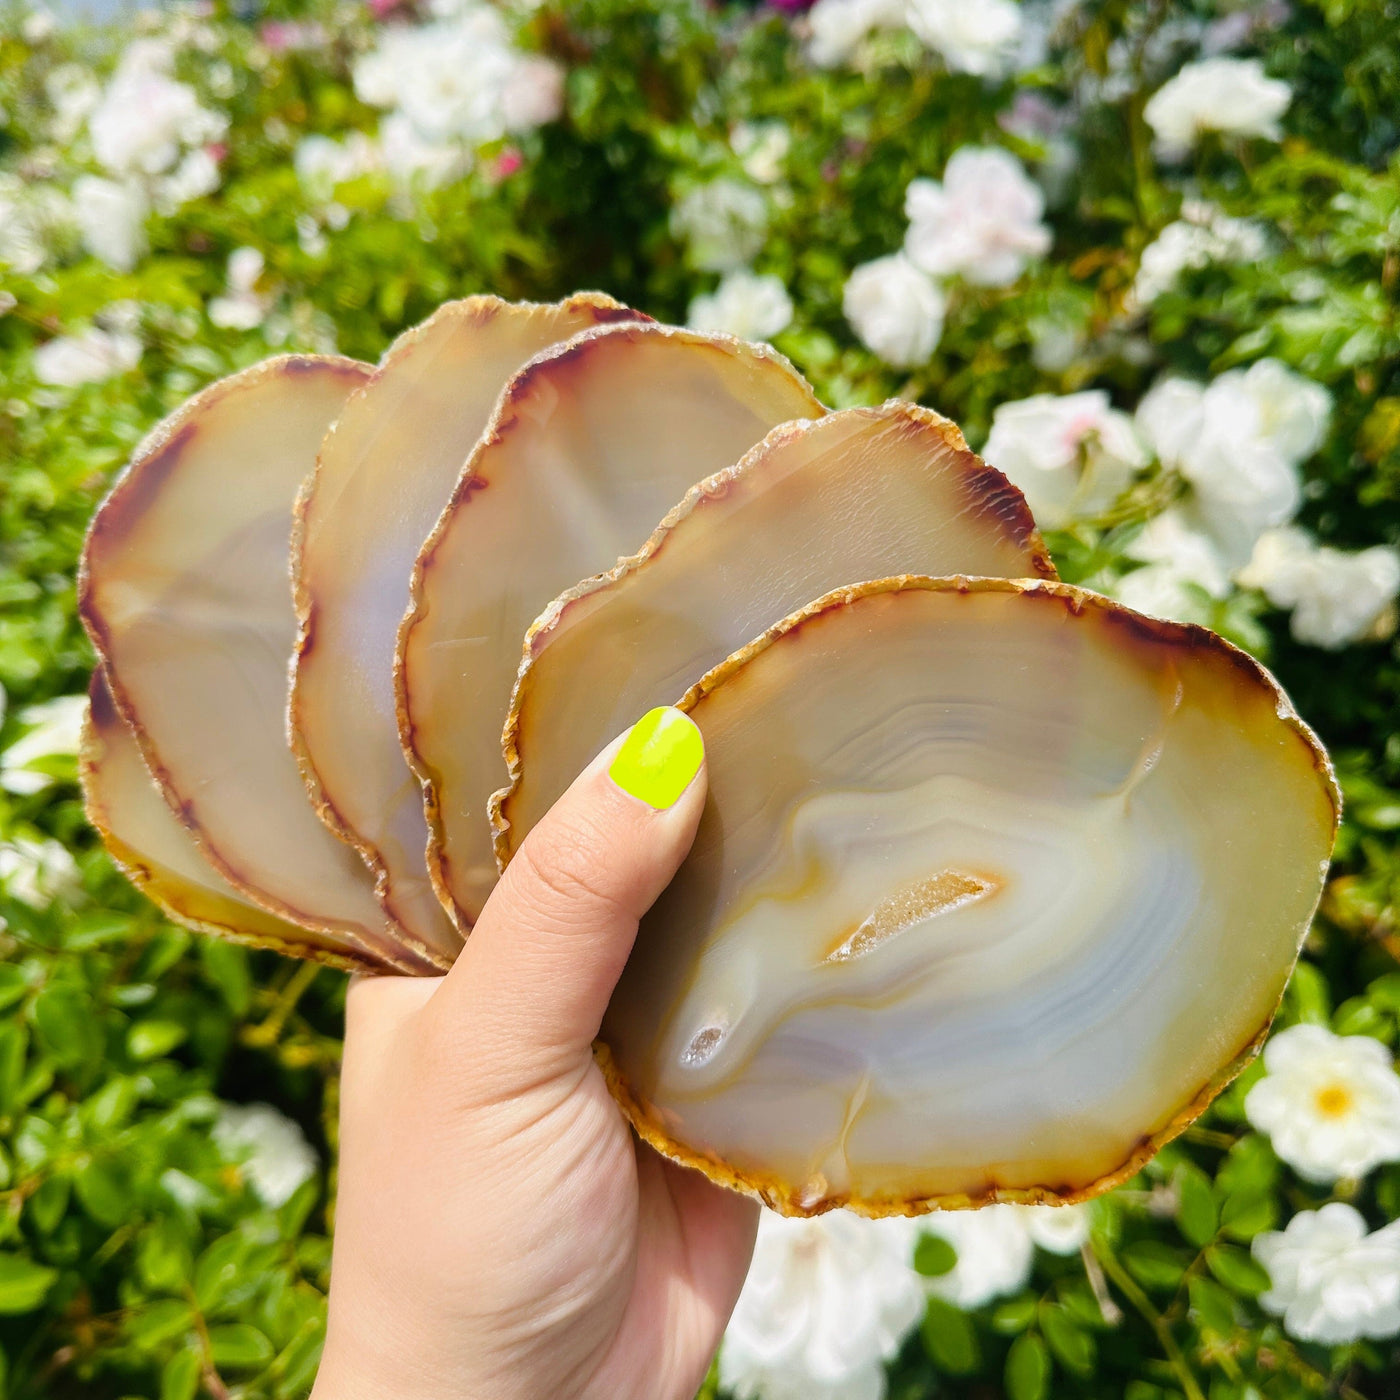 Iris Agate Slice Set - Six Agate Crystal Slices set of 6 agates in hand for size reference with flowers in background